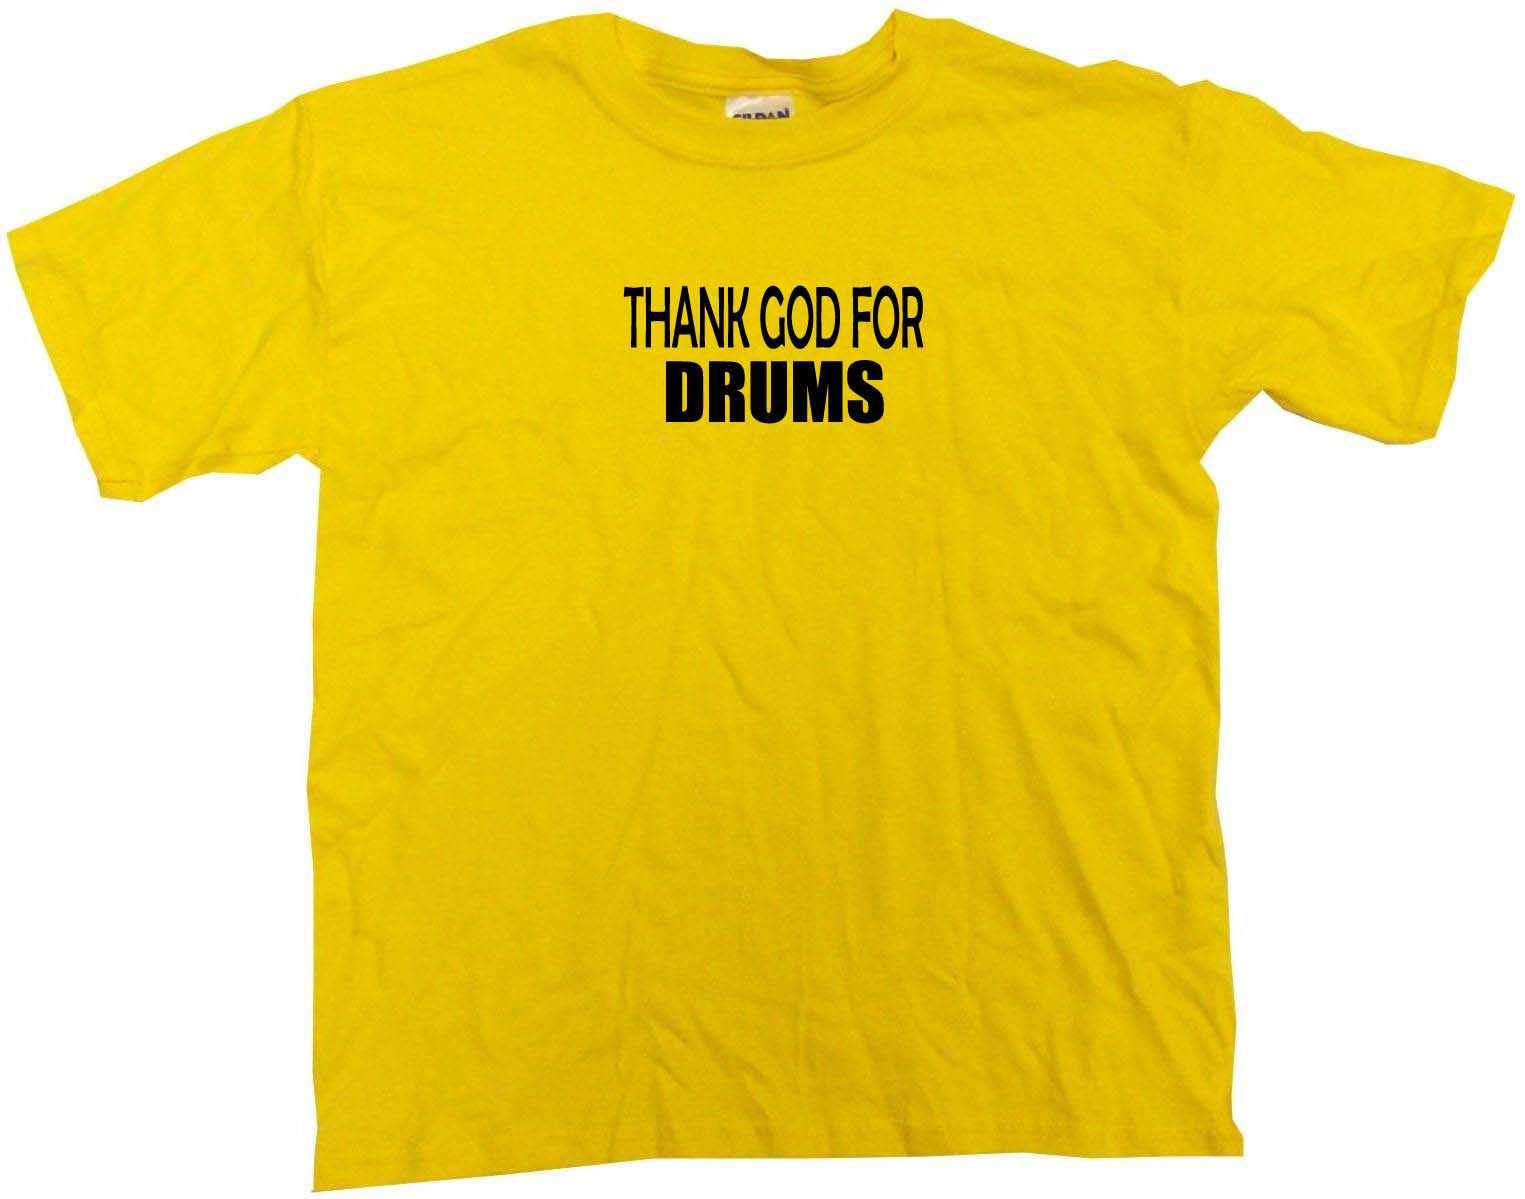 Thank God For Drums Kids Tee Shirt Pick Size & Color 2T XL 